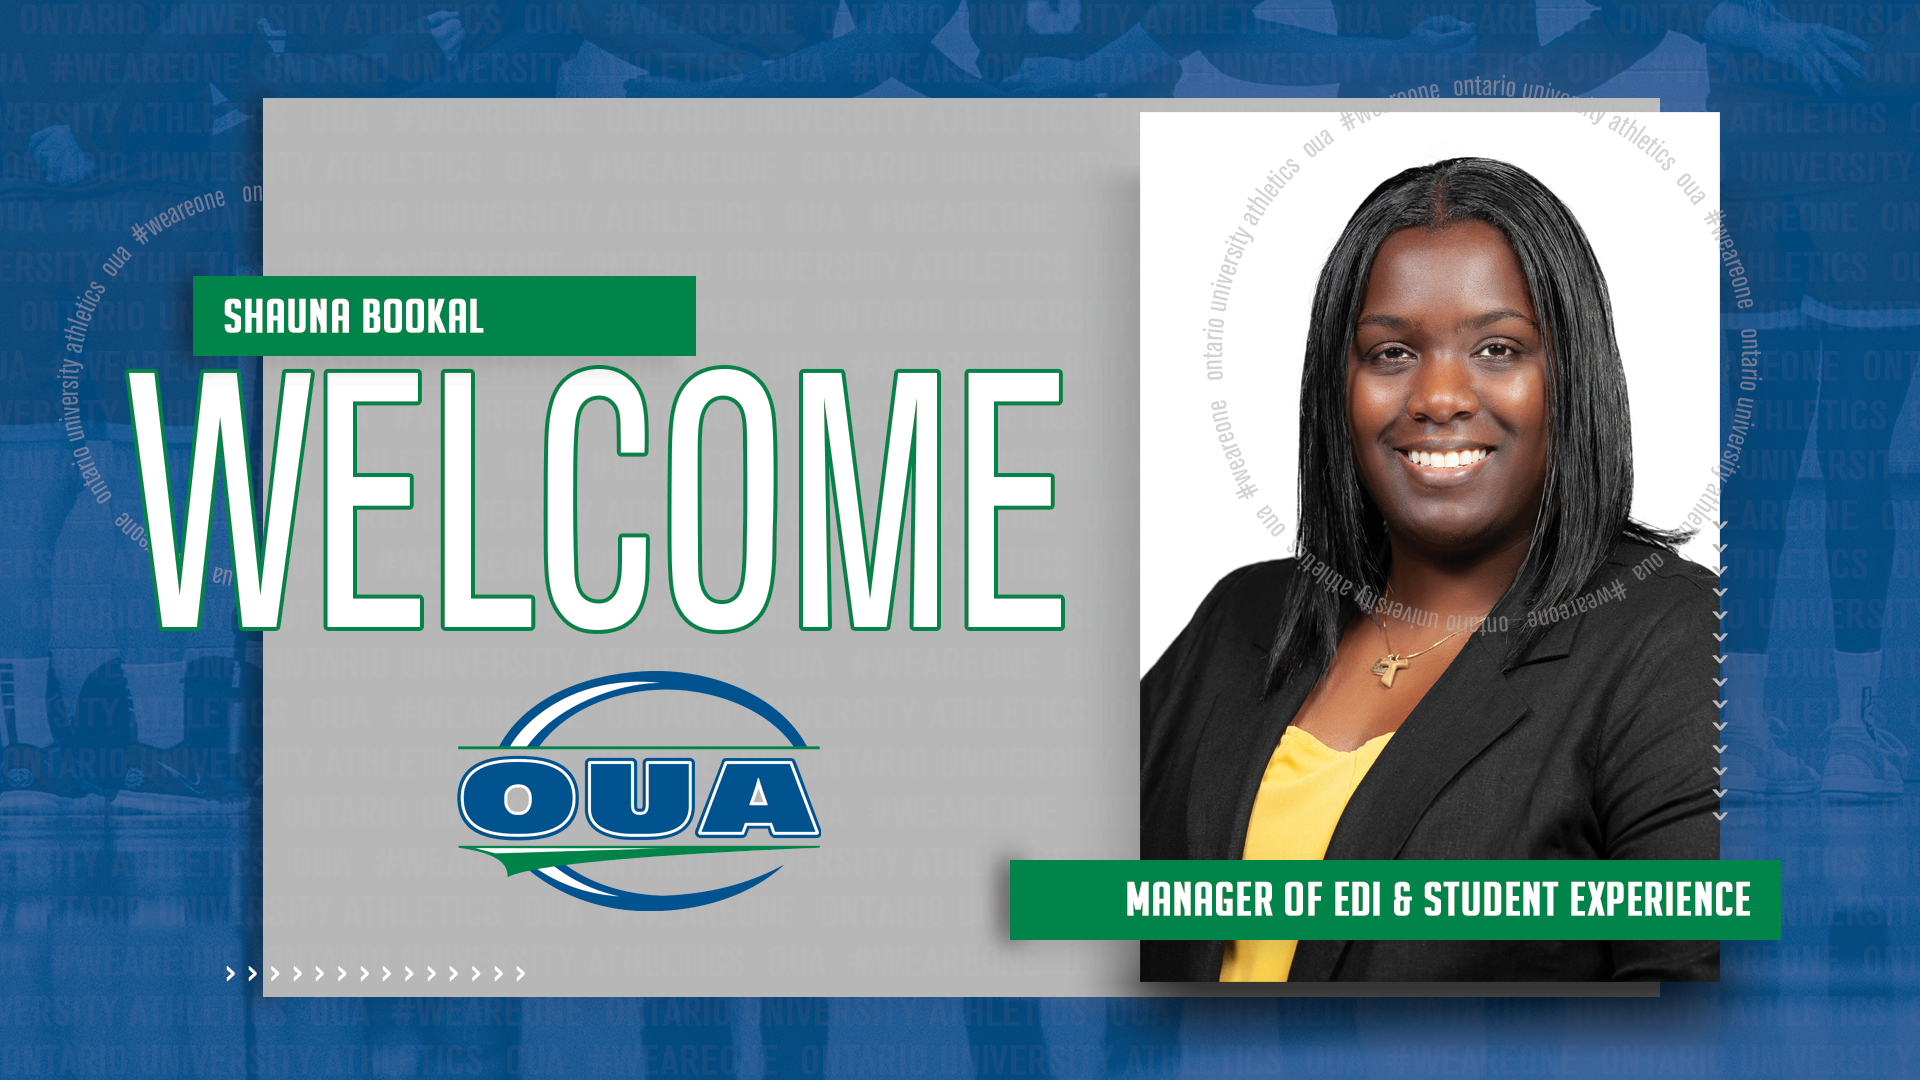 OUA announces Shauna Bookal as new Manager of EDI & Student Experience